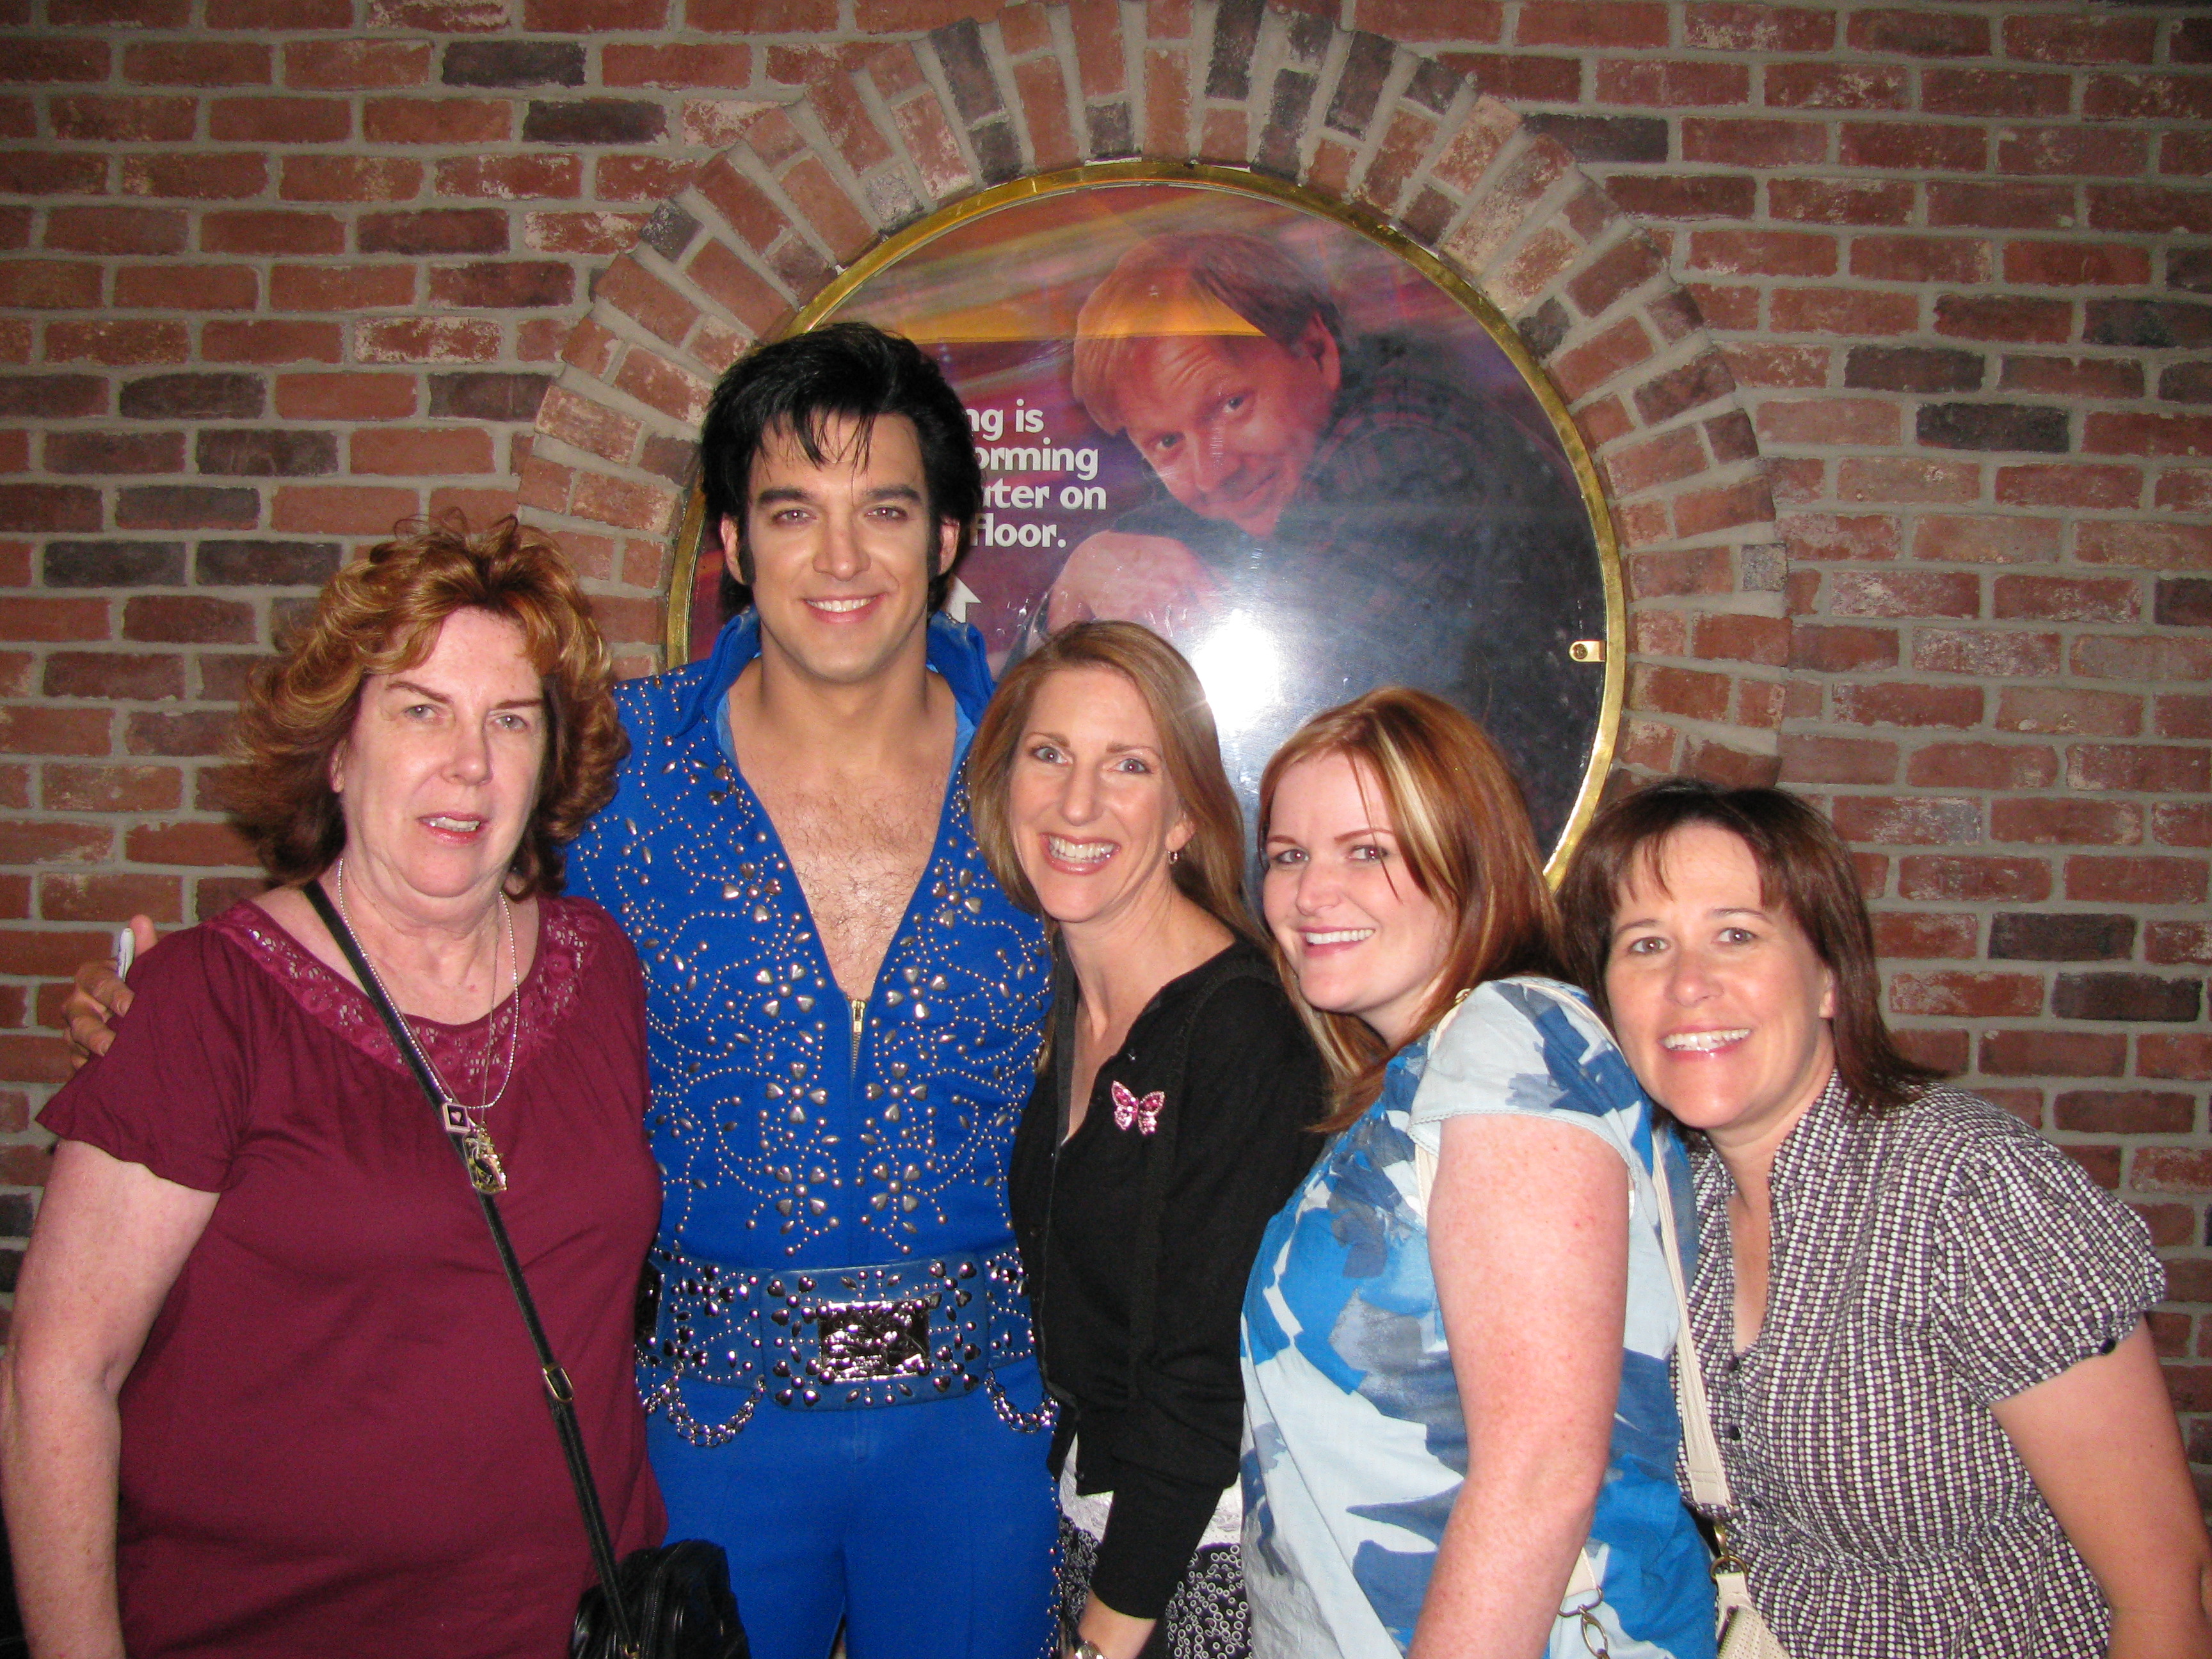 We did all the things you're supposed to do in Vegas...well, a couple of them. The obligatory Elvis impersonator. That's my Mom, Sharon, Elvis, me, Jen (my friend & makeup artist) and Susie (my friend and merchandise manager).